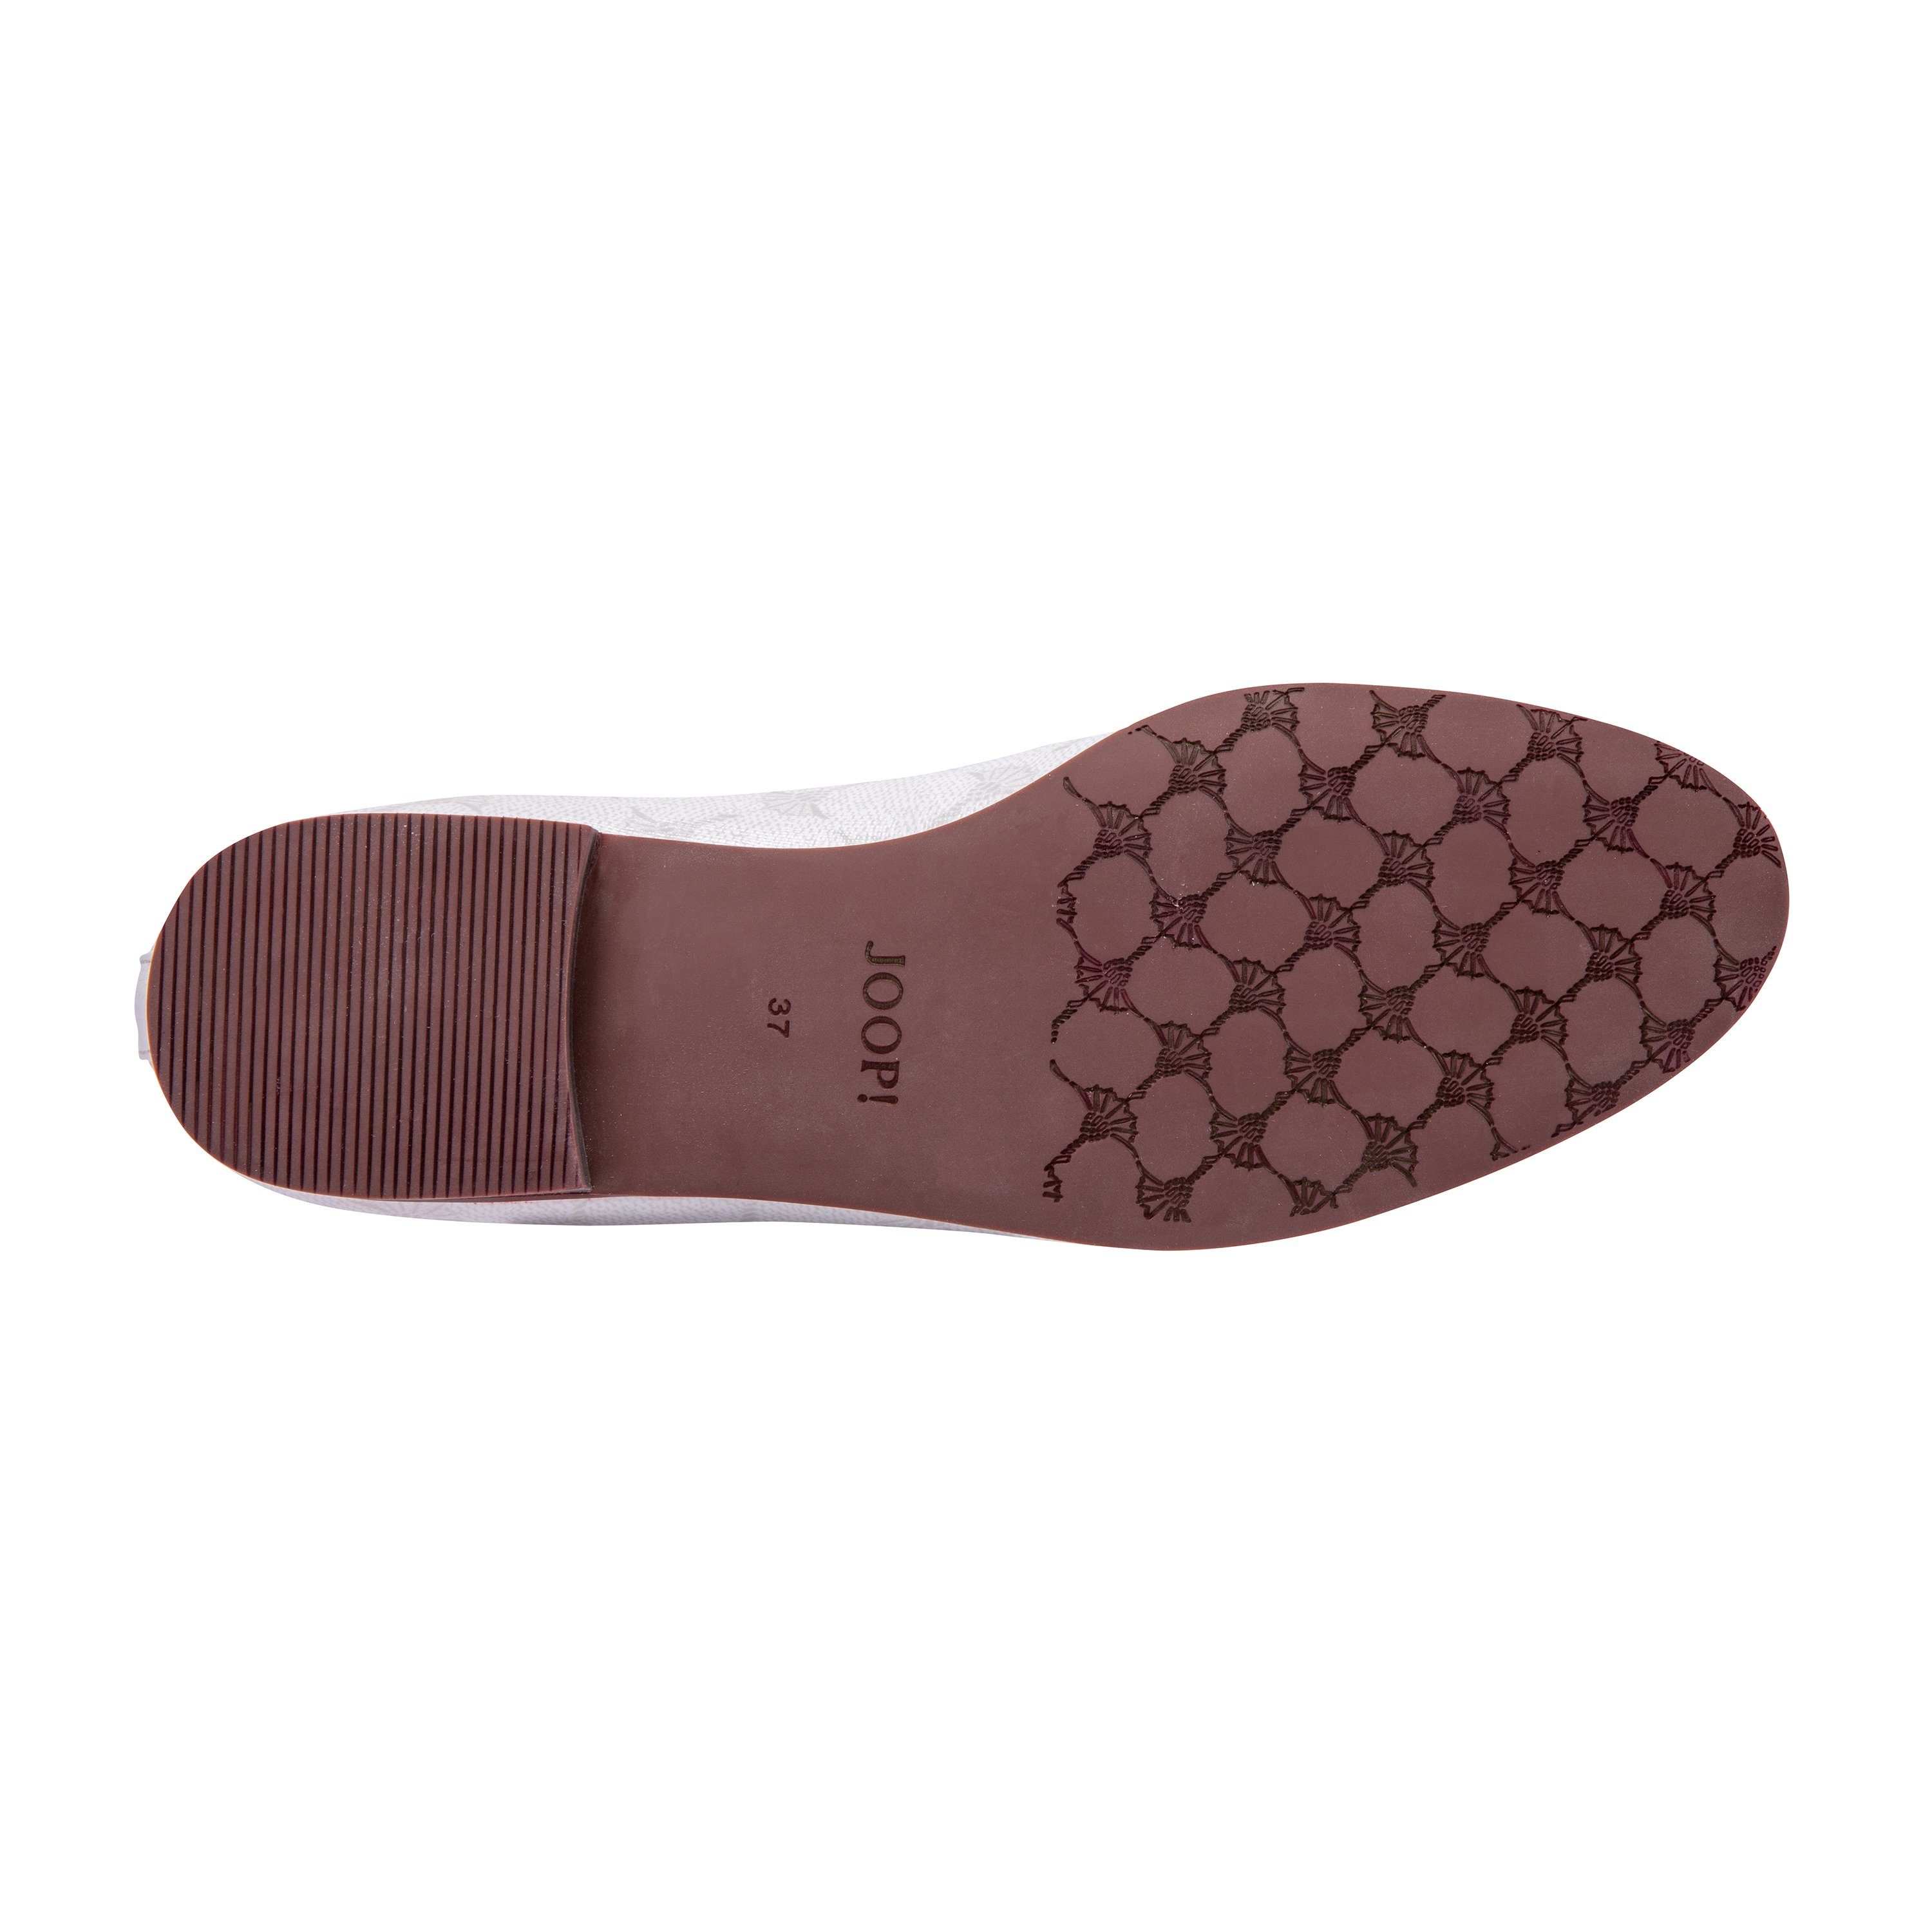 Slipper Joop! microfibre inner: outer: offwhite synthetic,